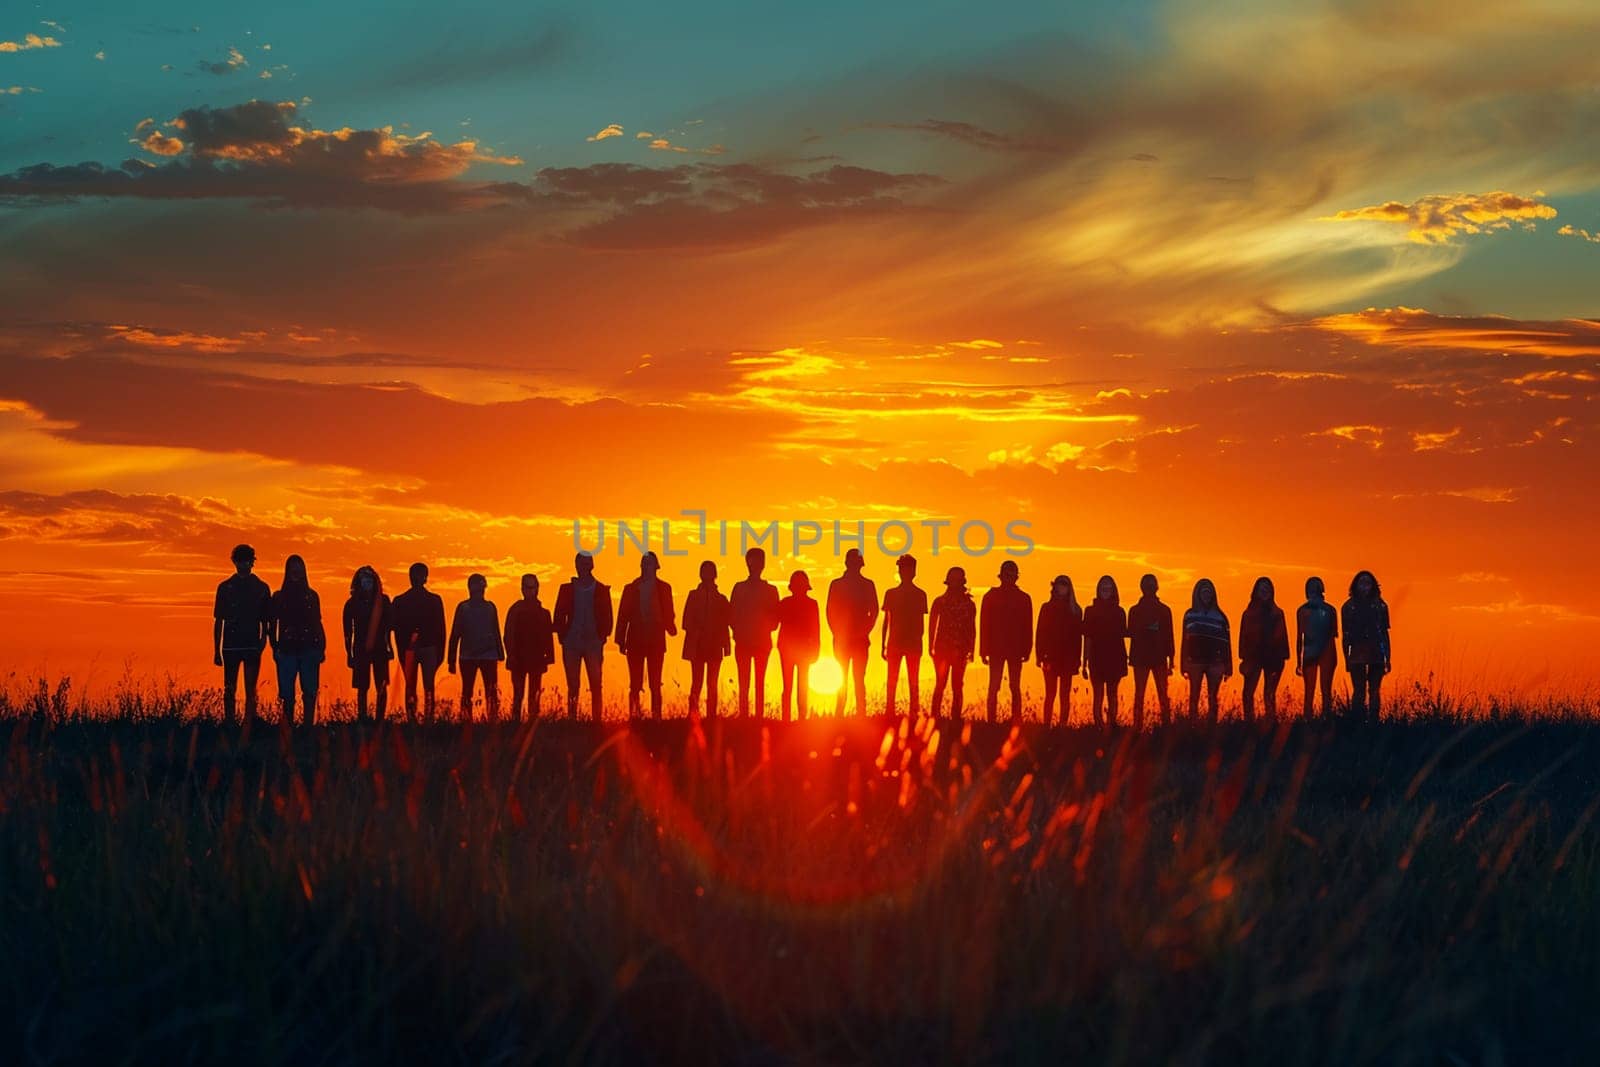 Group of silhouetted people standing together during vibrant sunset symbolizing unity, friendship, and togetherness in nature.